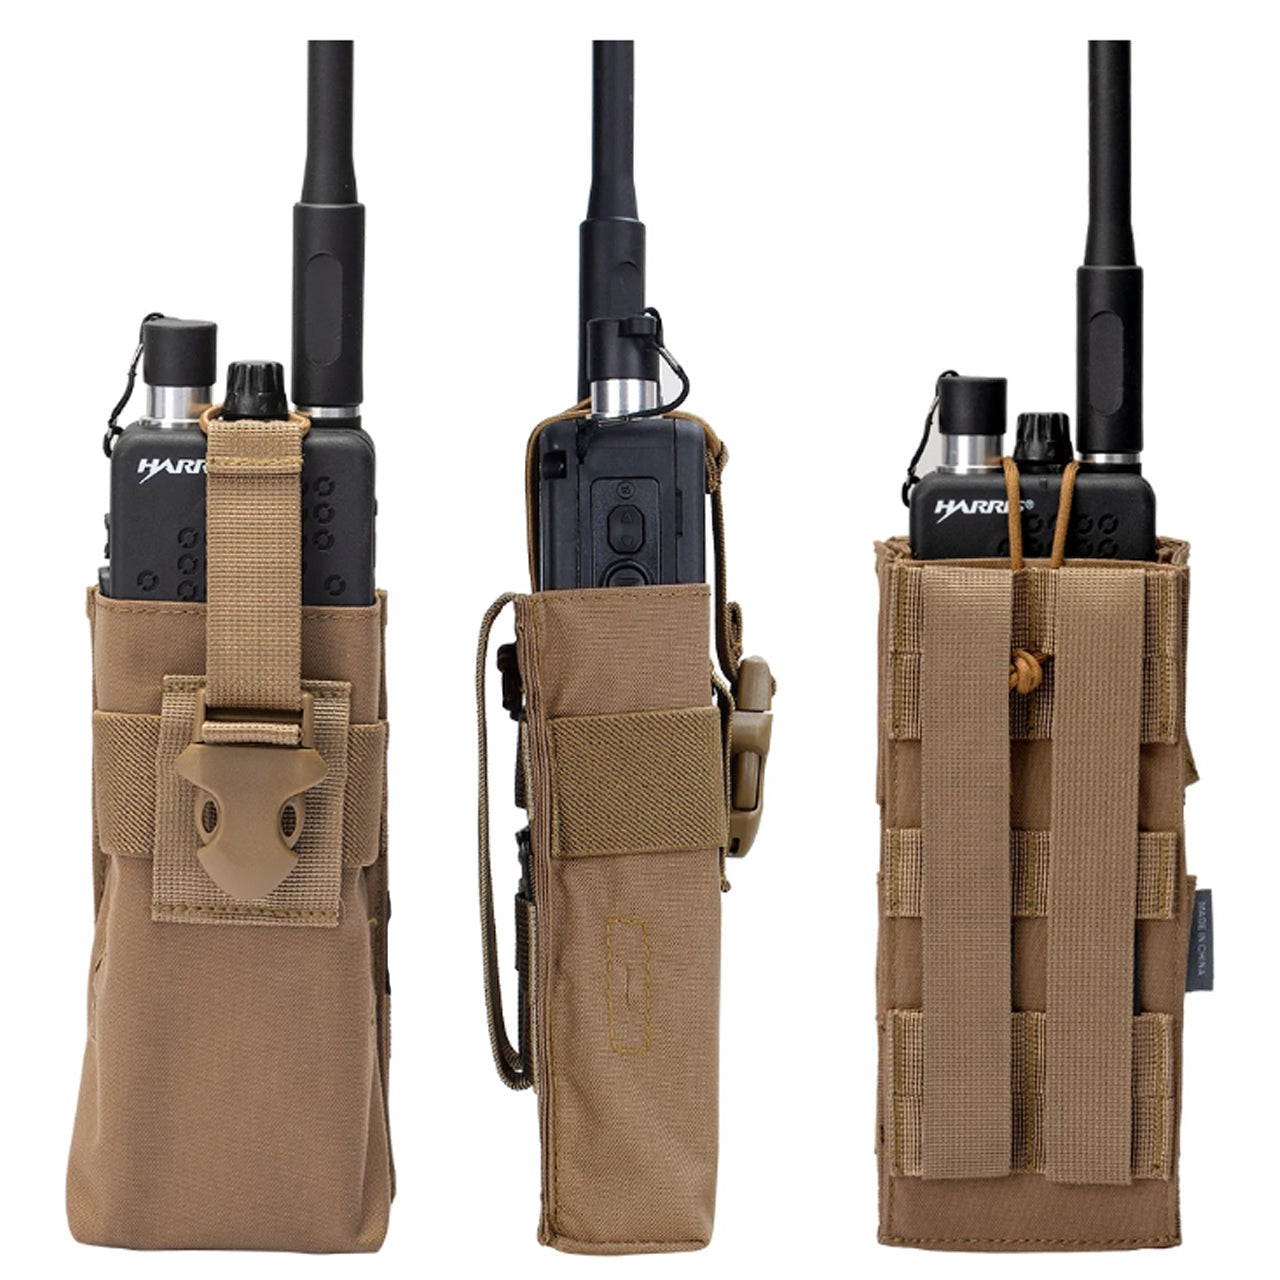 This pouch has been tailor-made to house your in-service Harris 152/148 radio, enabling you to access its screen and control panel with ease and speed. No longer will you need to take out the radio to change settings www.defenceqstore.com.au rear side and front view coyote pouch